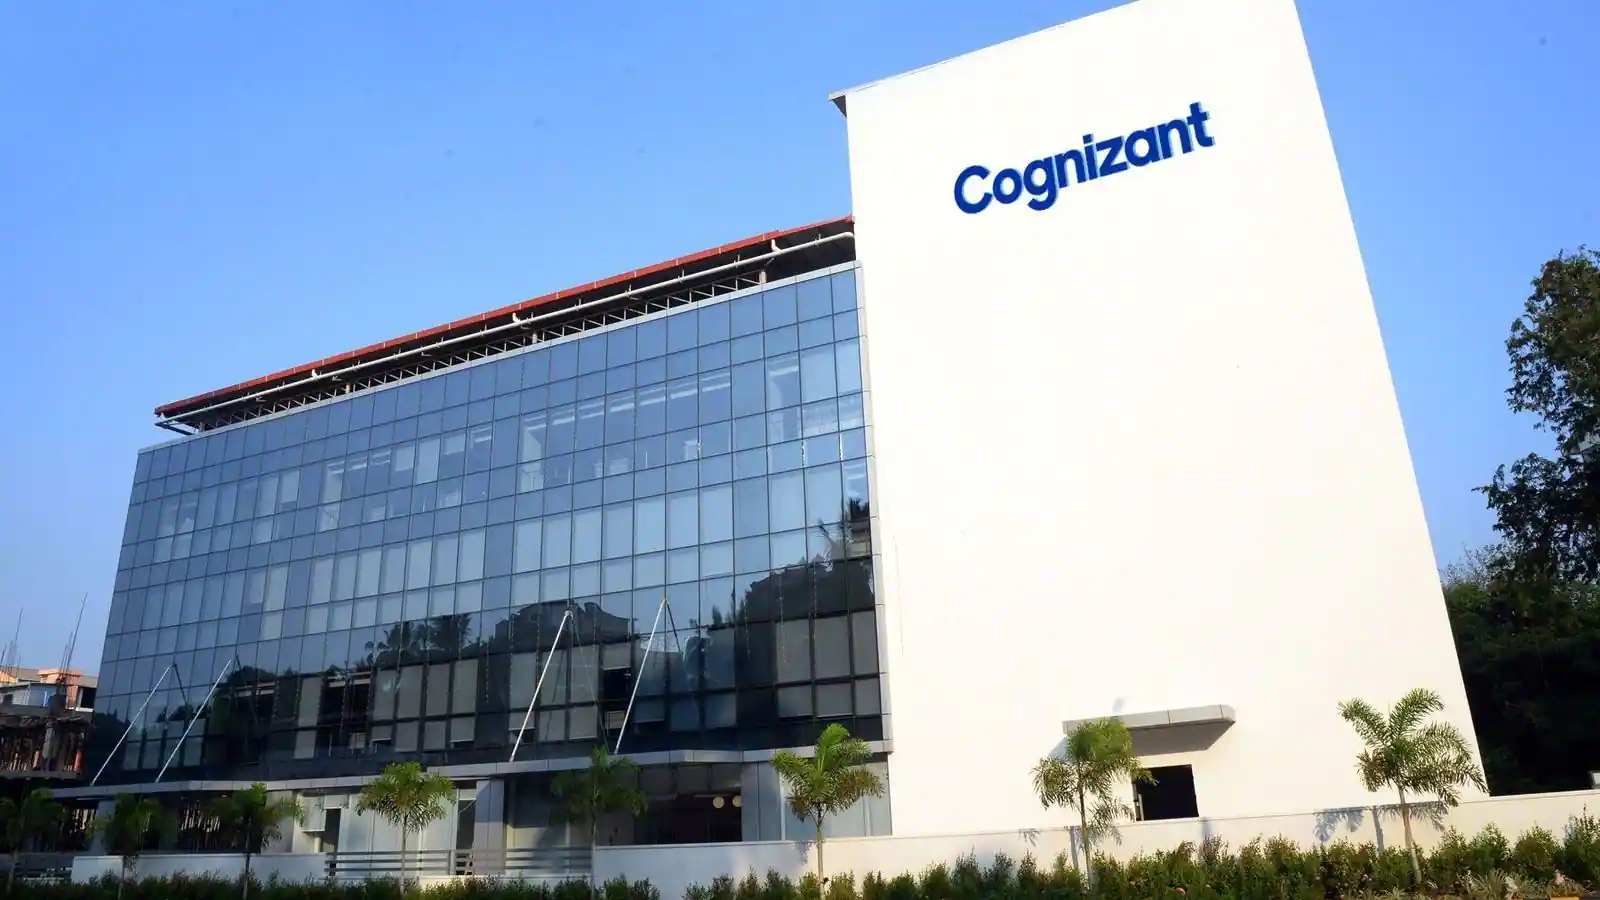 Cognizant one drive therapists emblemhealth queens